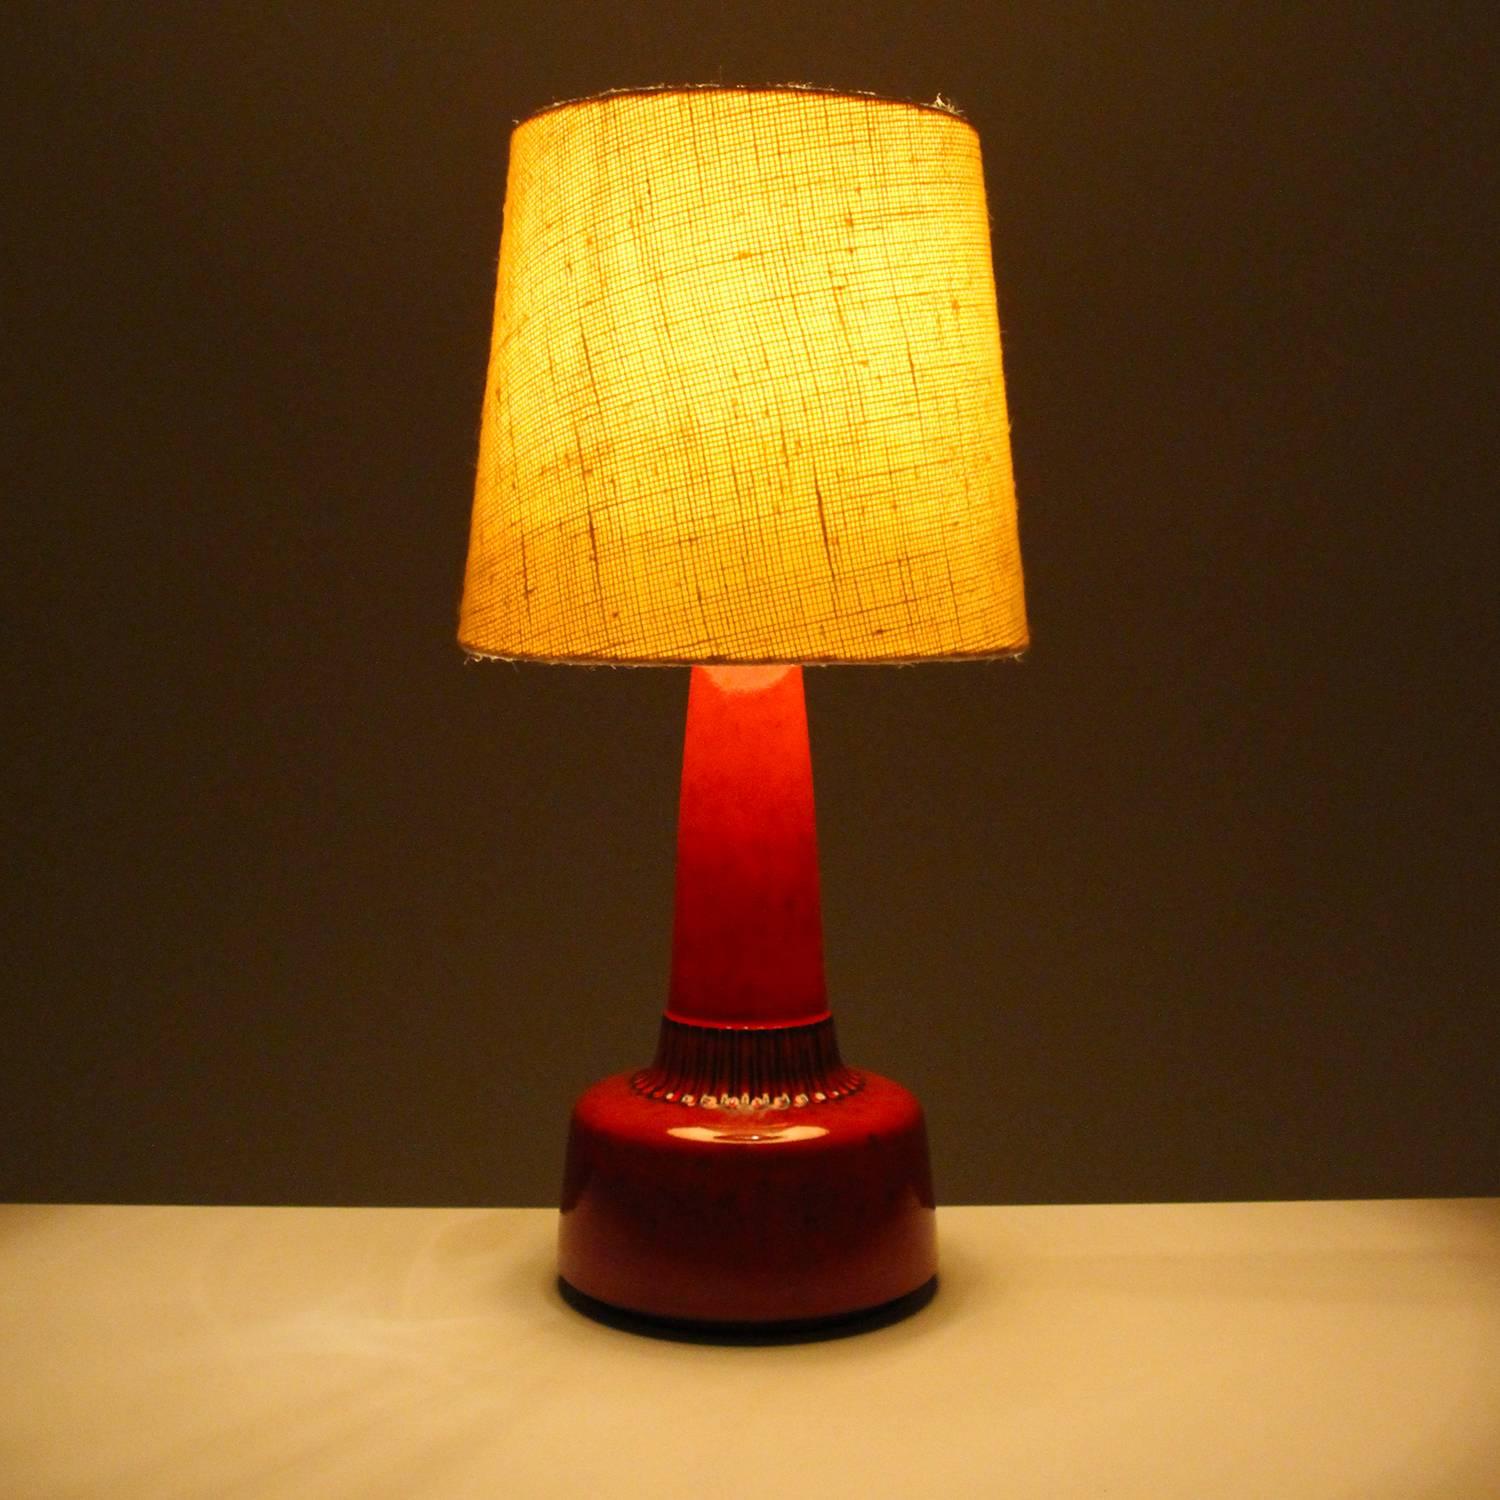 Red table lamp, No 1080-2 by Einar Johansen for Soholm Stentøj in the 1960s - gorgeous rich red glazed pottery lamp stand with cream white fabric shade included, all in excellent vintage condition.

This is a quite unusual Einar Johansen piece -